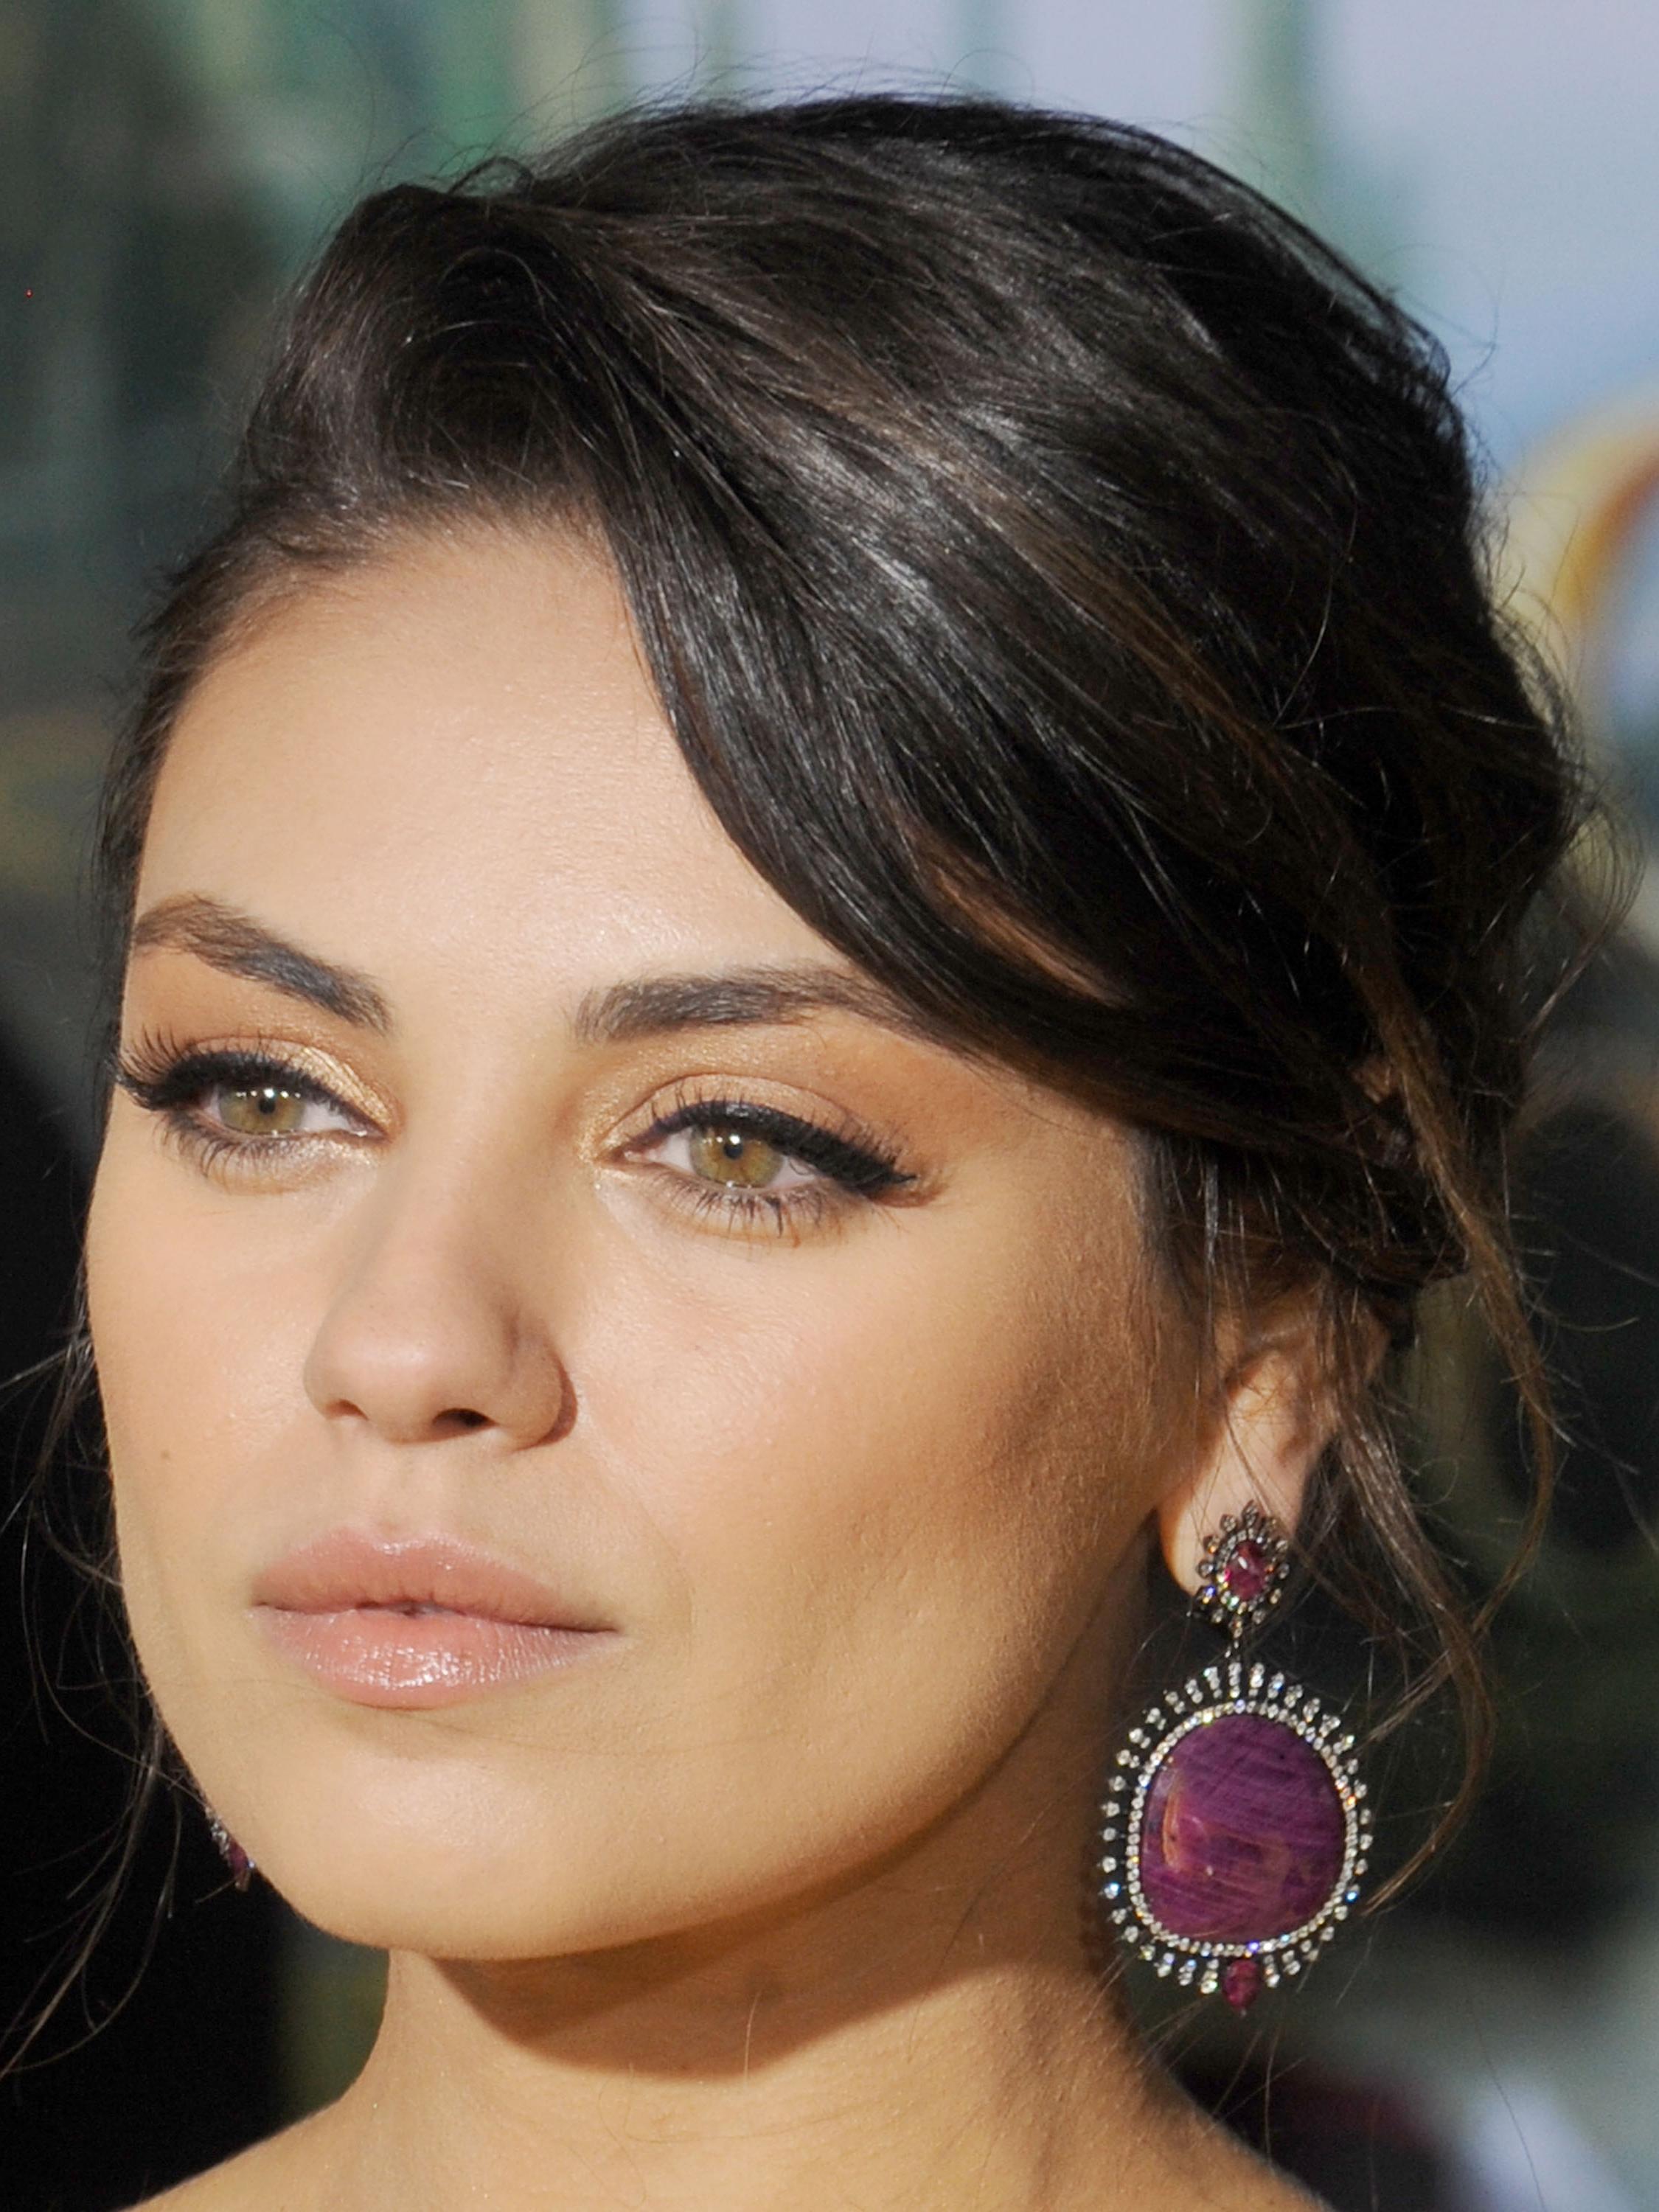 Steal Mila Kunis Makeup Look From Oz The Great And Powerful Premiere